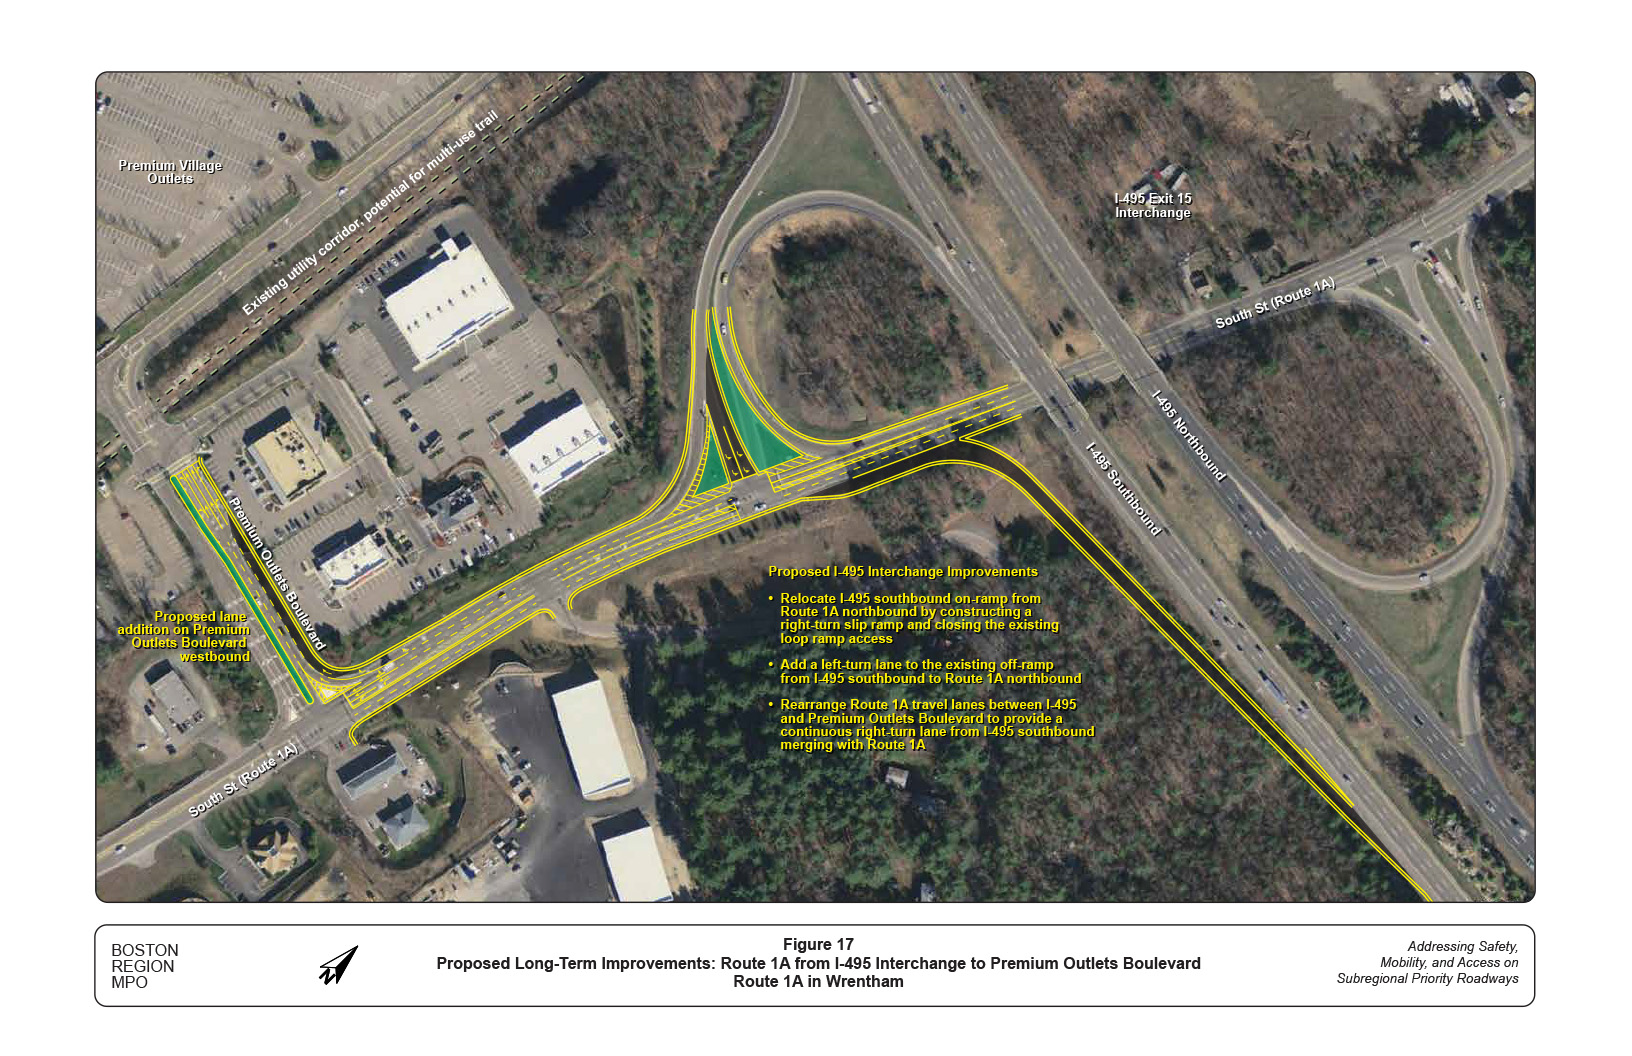 Figure 17 is a map that illustrates the proposed long-term improvements to sections of Route 1A between the Interstate 495 interchange and Premium Outlets Boulevard.